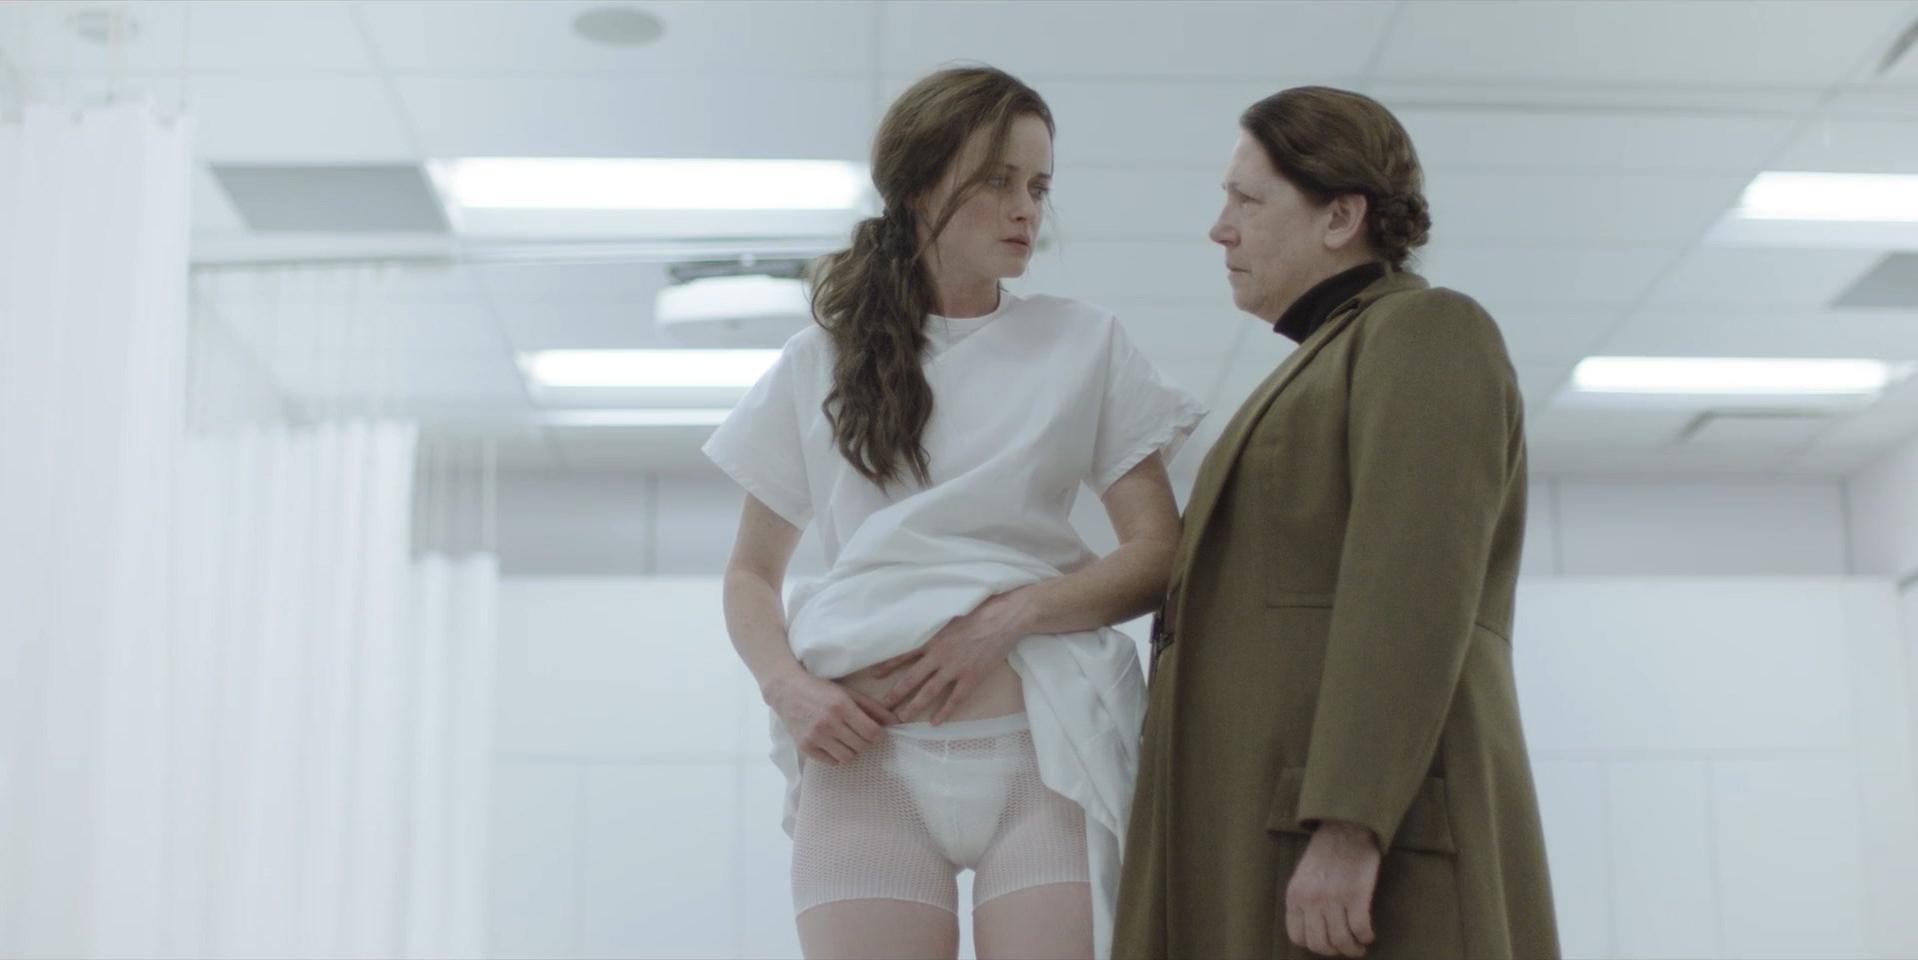 Elisabeth Moss sexy, Alexis Bledel sexy - The Handmaid’s Tale s01e01-04 (2017)